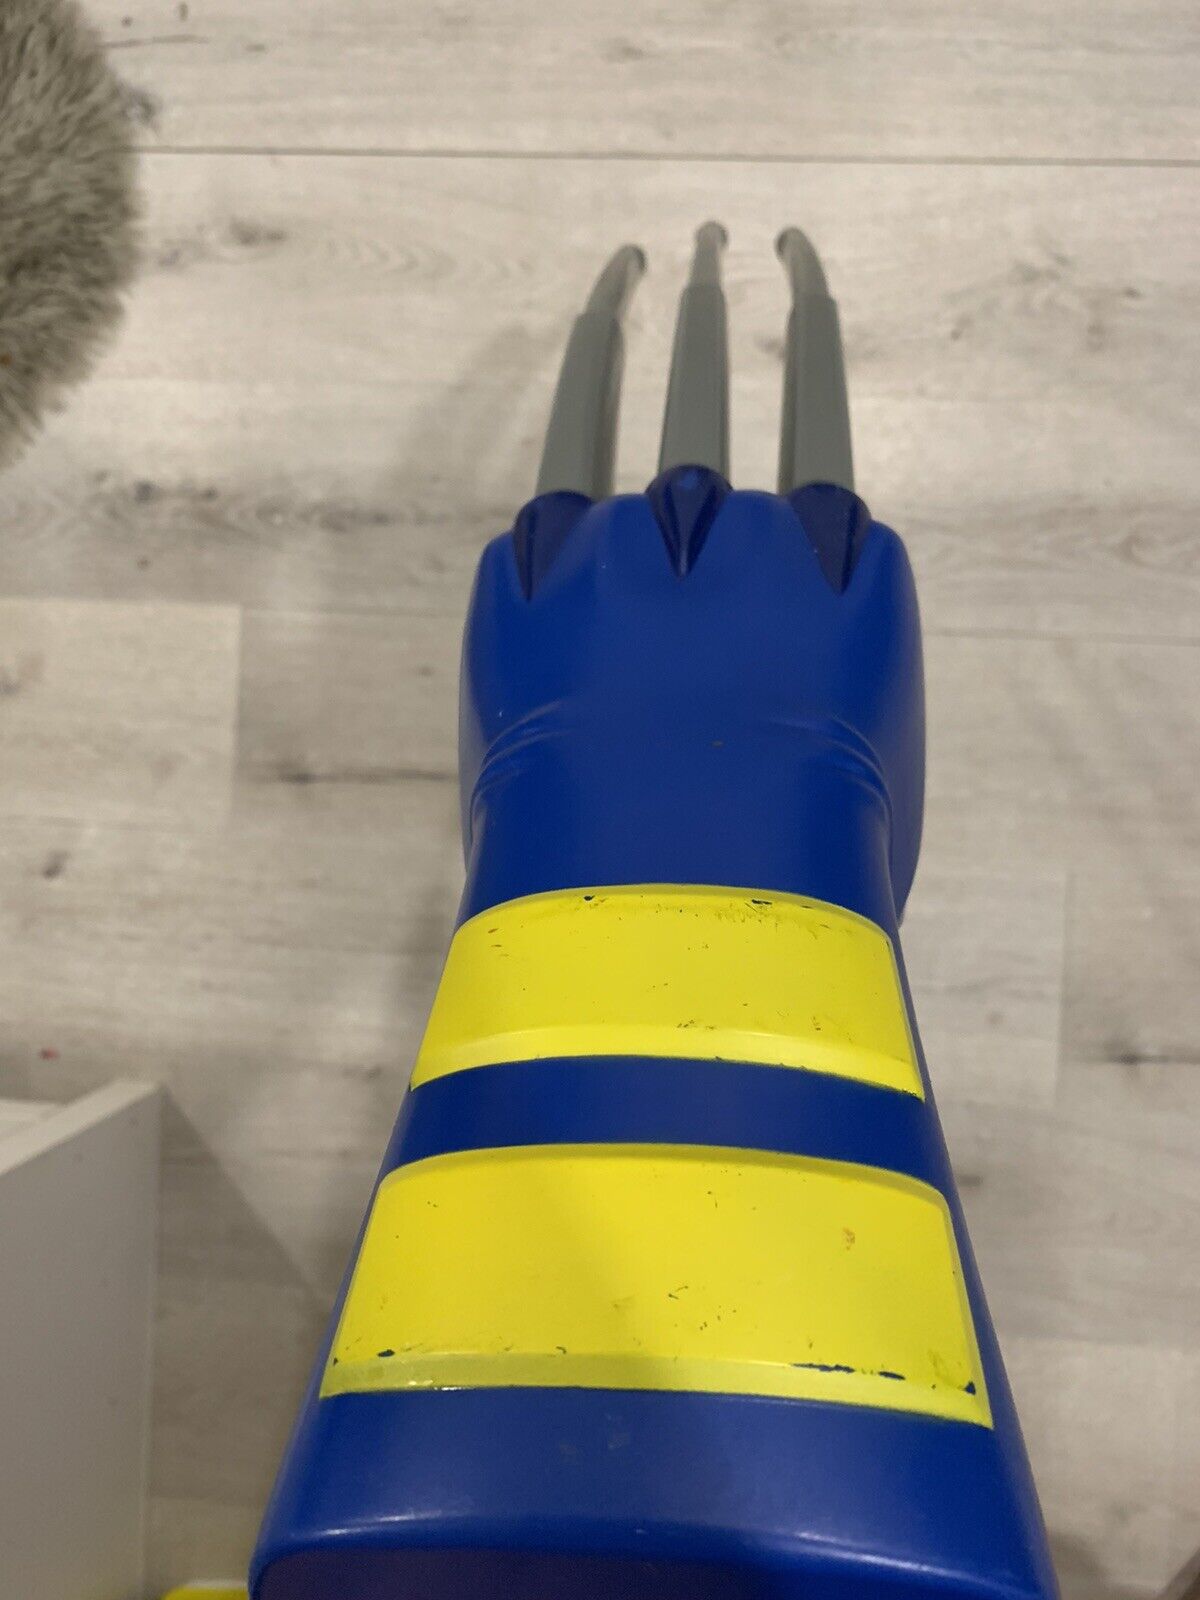 Marvel X-Men Wolverine Extendable Claw Glove Hasbro 2008 Tested. W/ Mask.